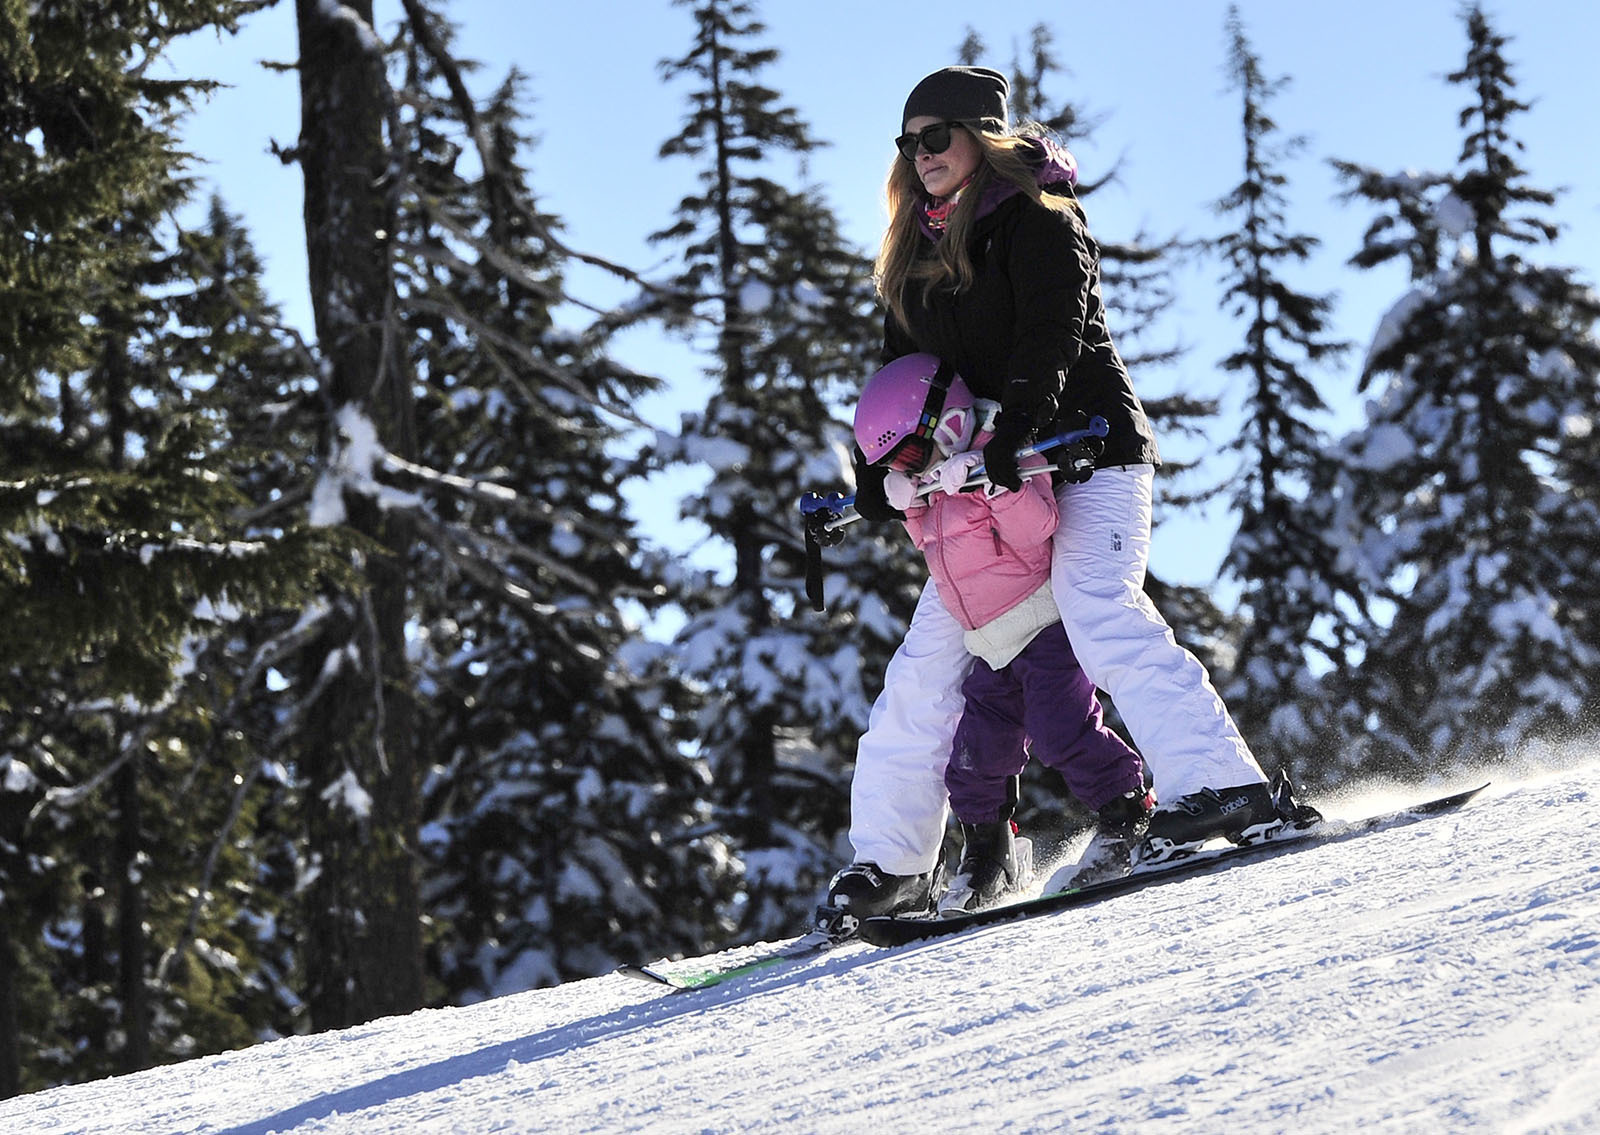 ADVANCE FOR USE SATURDAY, JAN. 21 - In this Sunday, Jan. 15, 2017, Marisa Paine skis with her daughter Carys Paine, 5, near the base of Sunshine Accelerator ski lift at Mount Bachelor in Bend, Ore. (Ryan Brennecke/The Bulletin via AP)